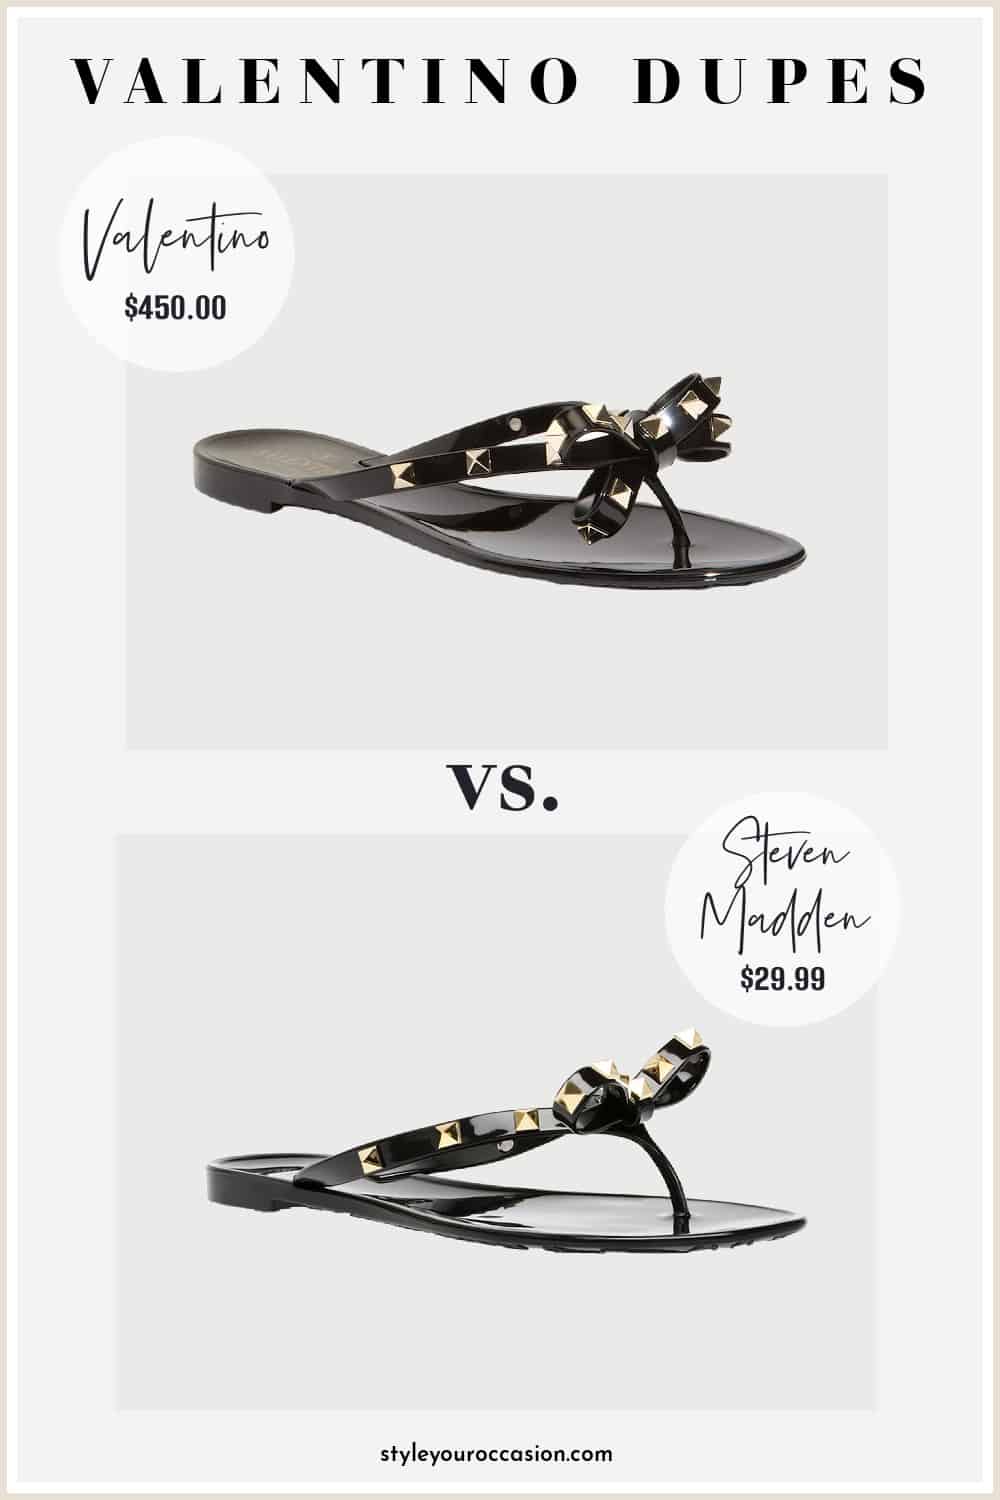 image of a Valentino rockstud jelly thong sandal in black and a look-alike sandal